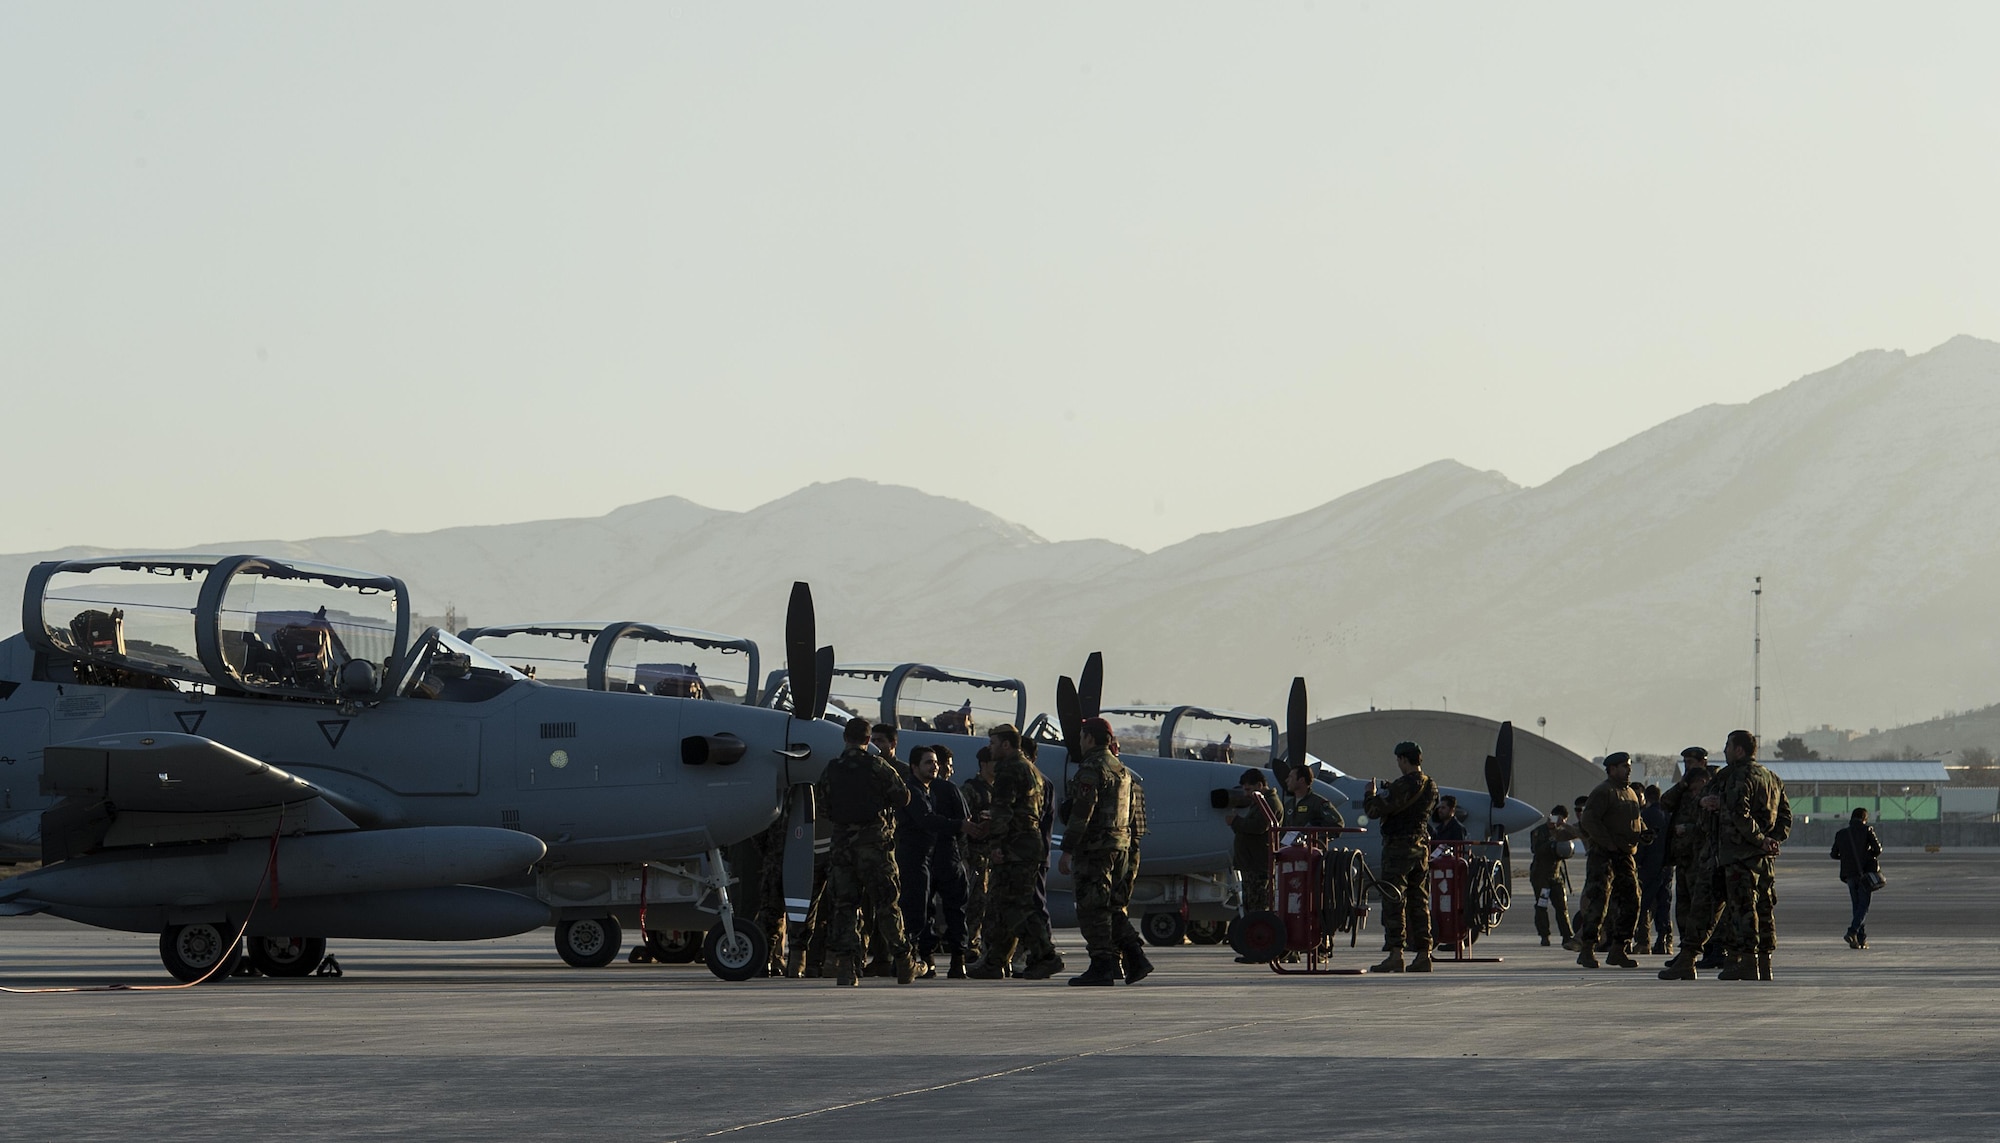 Four A-29 Super Tucanos arrive at Hamid Karzai International Airport, Afghanistan, Jan. 15, 2016. The aircraft will be added to the Afghans' inventory in the spring of 2016. The A-29 Super Tucano is a 'light air support' aircraft capable of conducting close air support, aerial escort, armed overwatch and aerial interdiction. Designed to operate in high temperature and in extremely rugged terrain, the A-29 Super Tucano is highly maneuverable 4th generation weapons system capable of delivering precision guided munitions. It can fly at low speeds and low altitudes, is easy to fly, and provides exceptionally accurate weapons delivery. It is currently in service with 10 different air forces around the world. (U.S. Air Force photo by Tech. Sgt. Nathan Lipscomb)